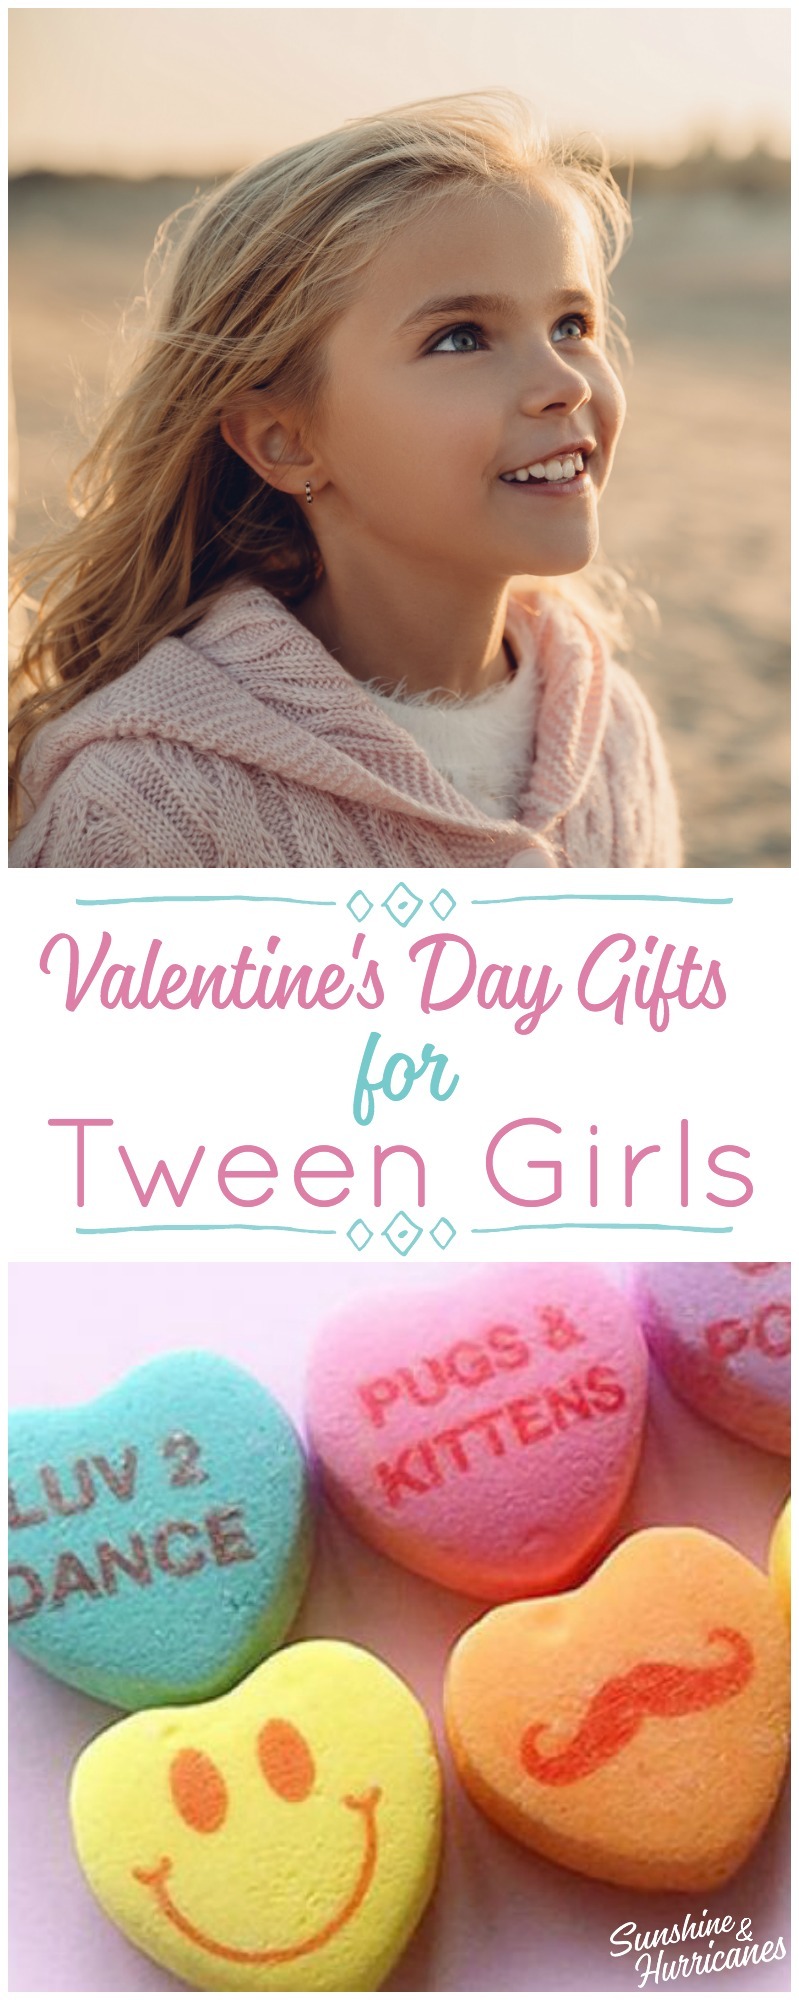 Valentine's Day gifts for tween girls She may be a little more spicy than sweet at the moment, but it doesn't meant she won't love knowing that you still think she's your Valentine.